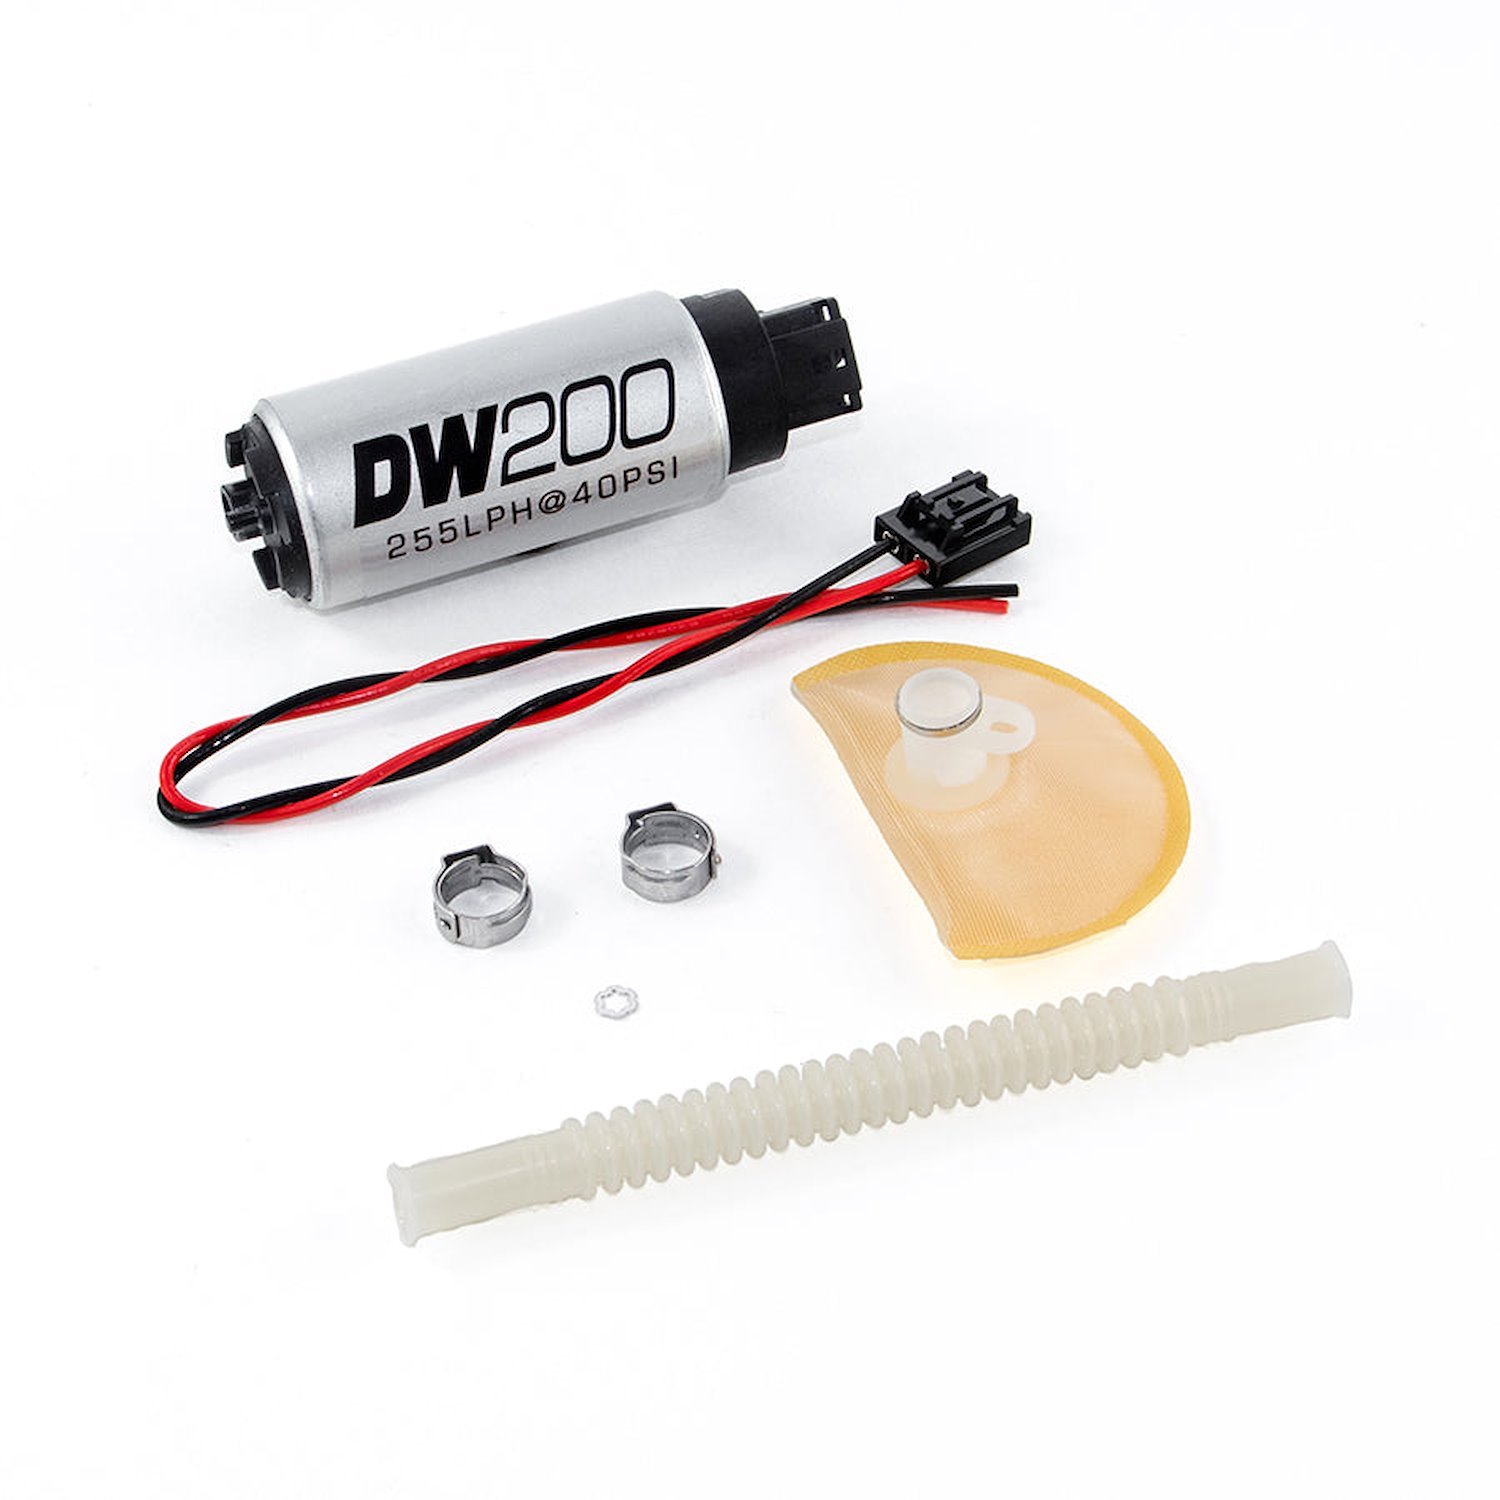 92011020 DW200 series 255lph in-tank fuel pump w/ install kit for Nissan 370z 2009-2015 and Infiniti G37 2008-2014